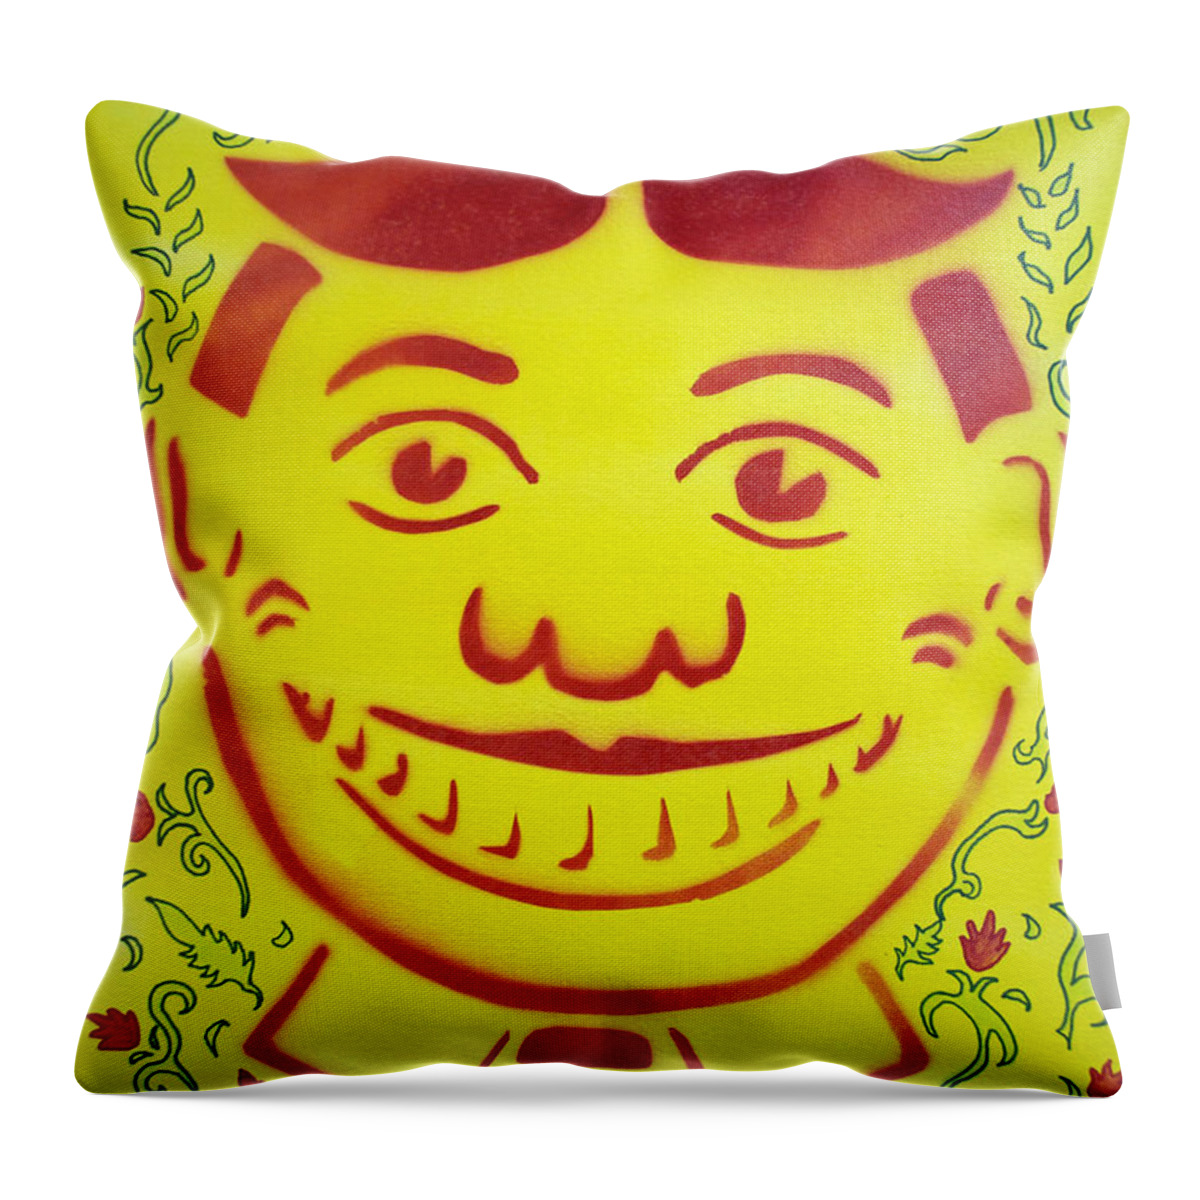 Tillie Of Asbury Park Throw Pillow featuring the painting Red on yellow with decoration Tillie by Patricia Arroyo